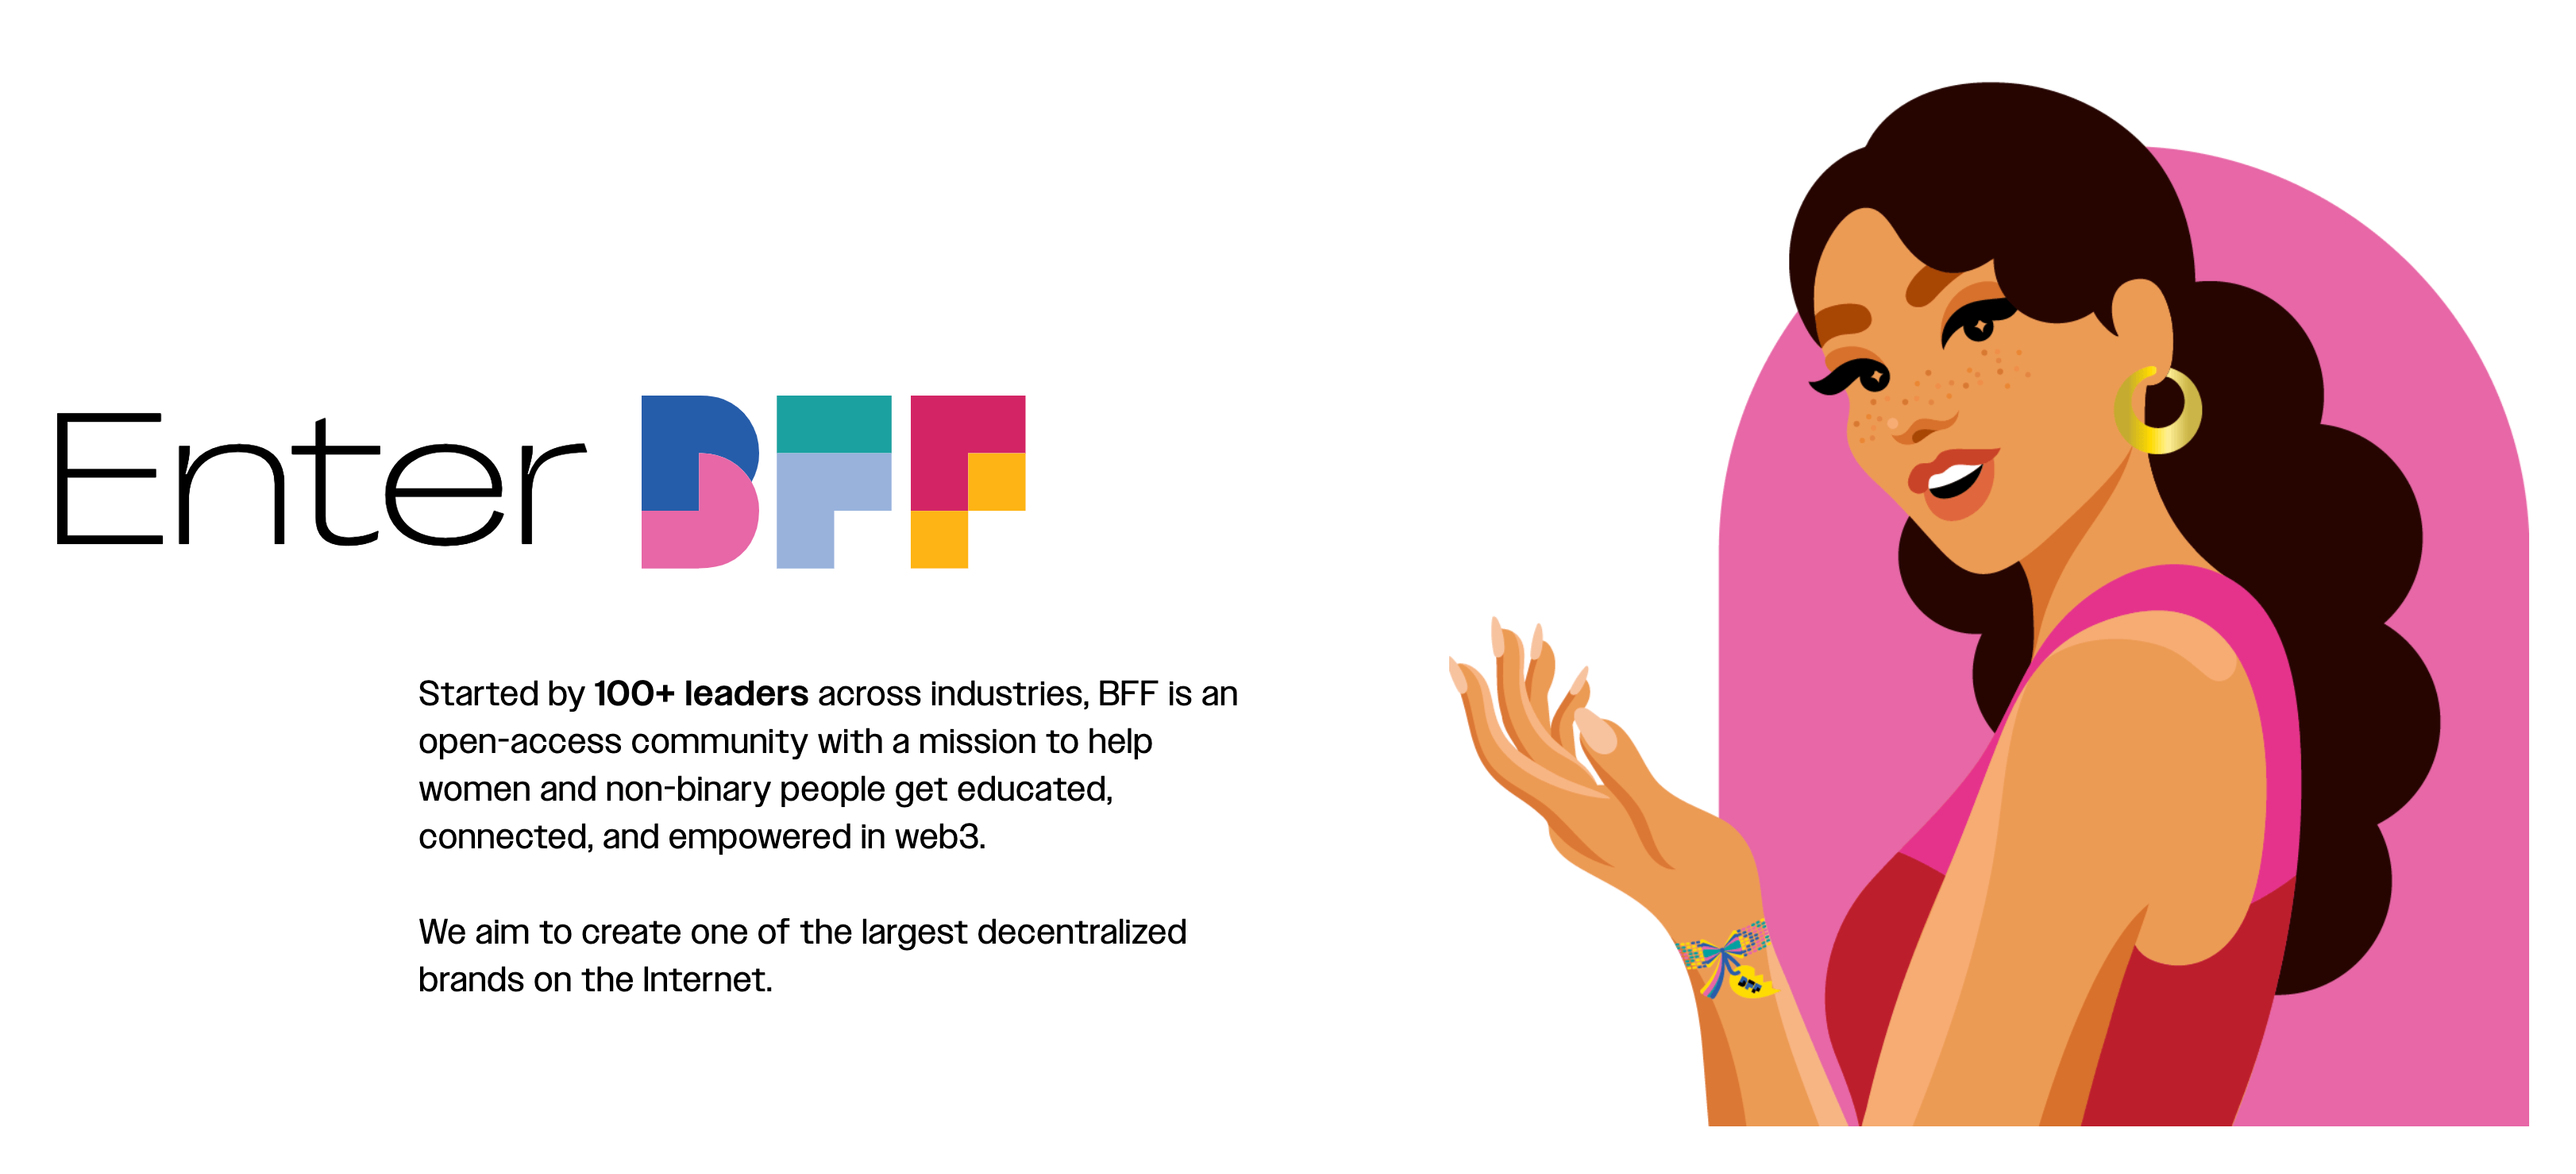 BFF is an open-access community with a mission to help women and non-binary people get educated, connected, and empowered in web3. (source: https://www.mybff.com/)